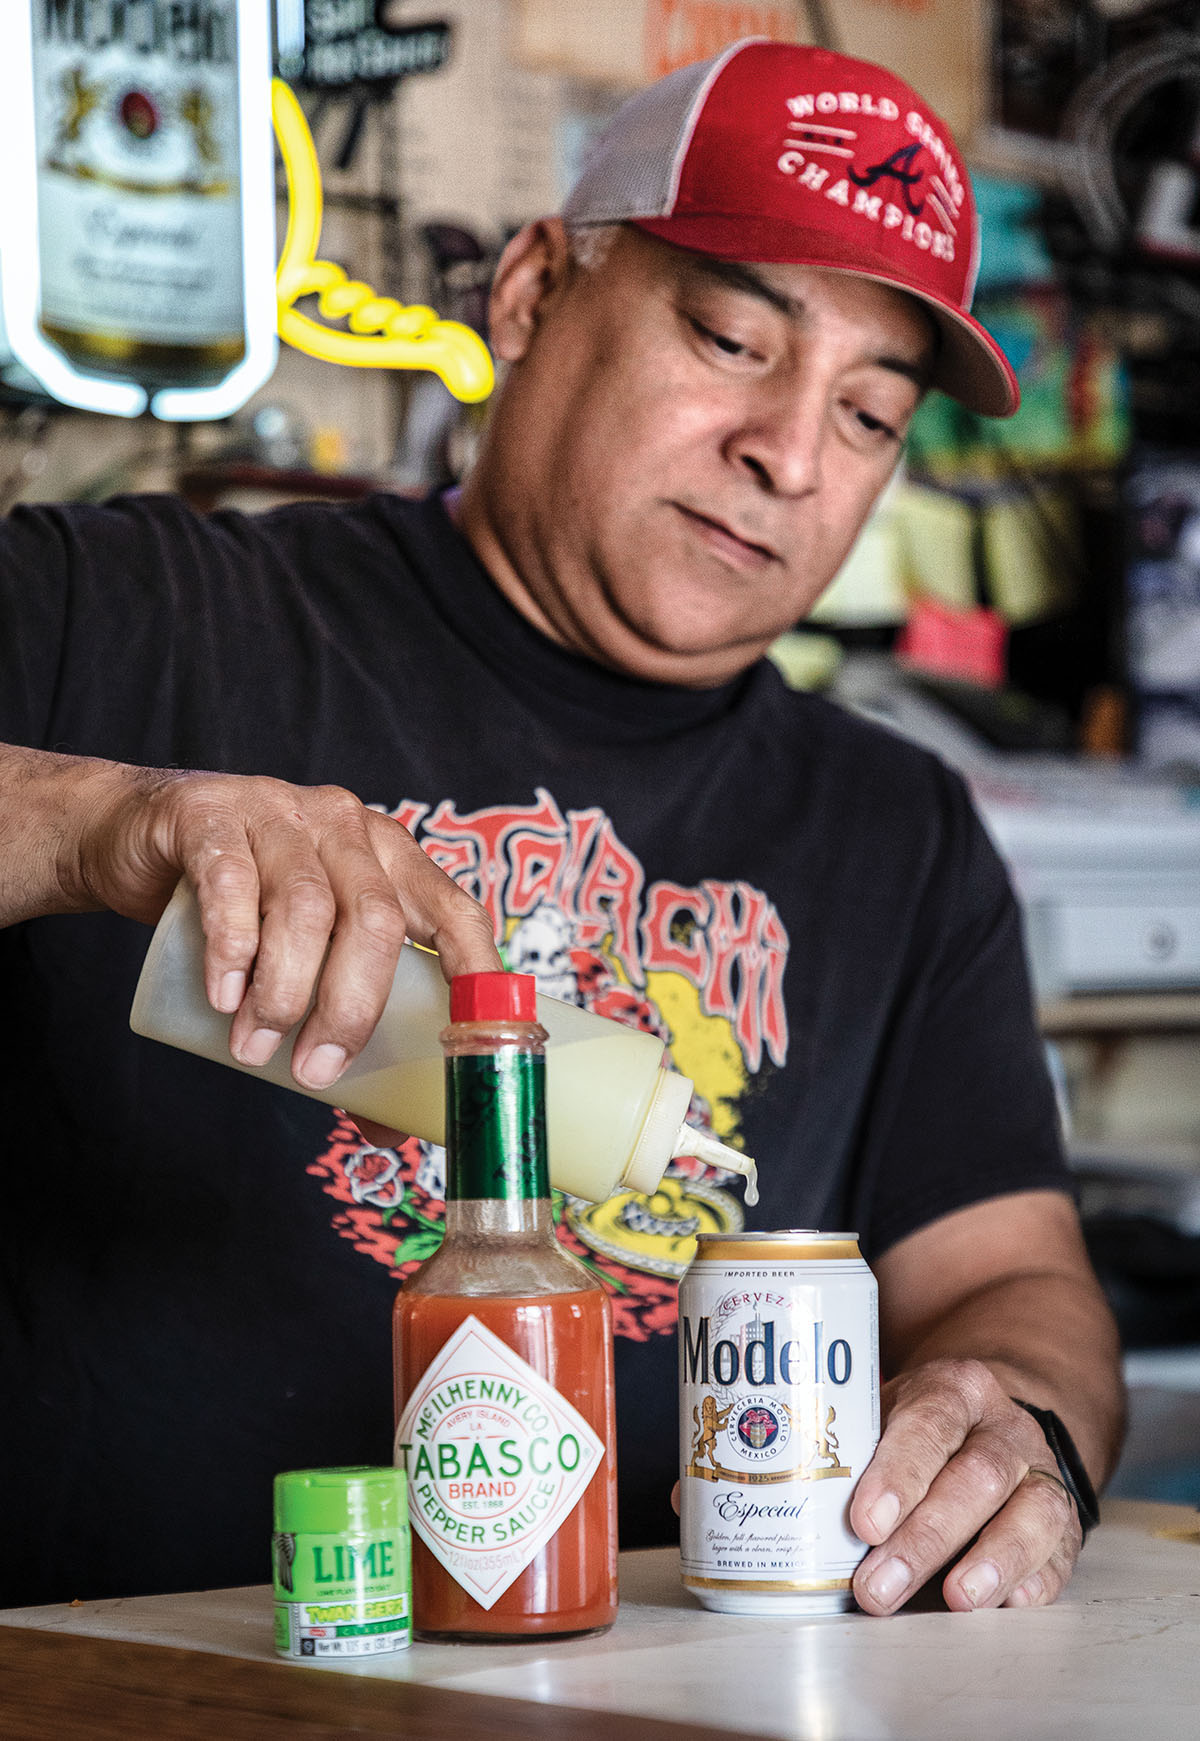 A man in a red baseball cap pours lime juice into a small can of Modelo